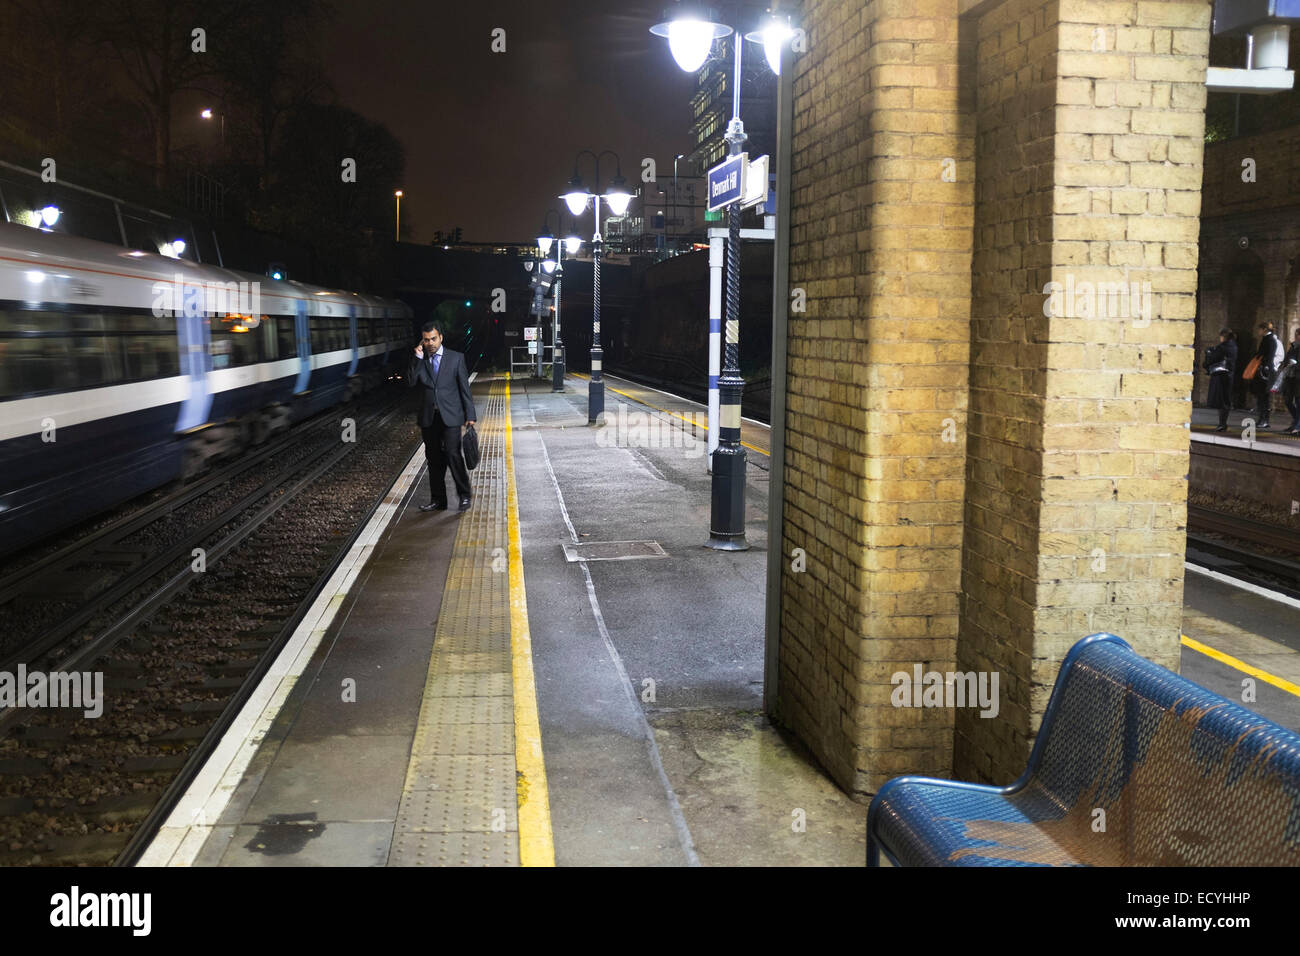 Commuter waiting for Overground train during rush hour at Denmark Hill station,  London, UK. Stock Photo